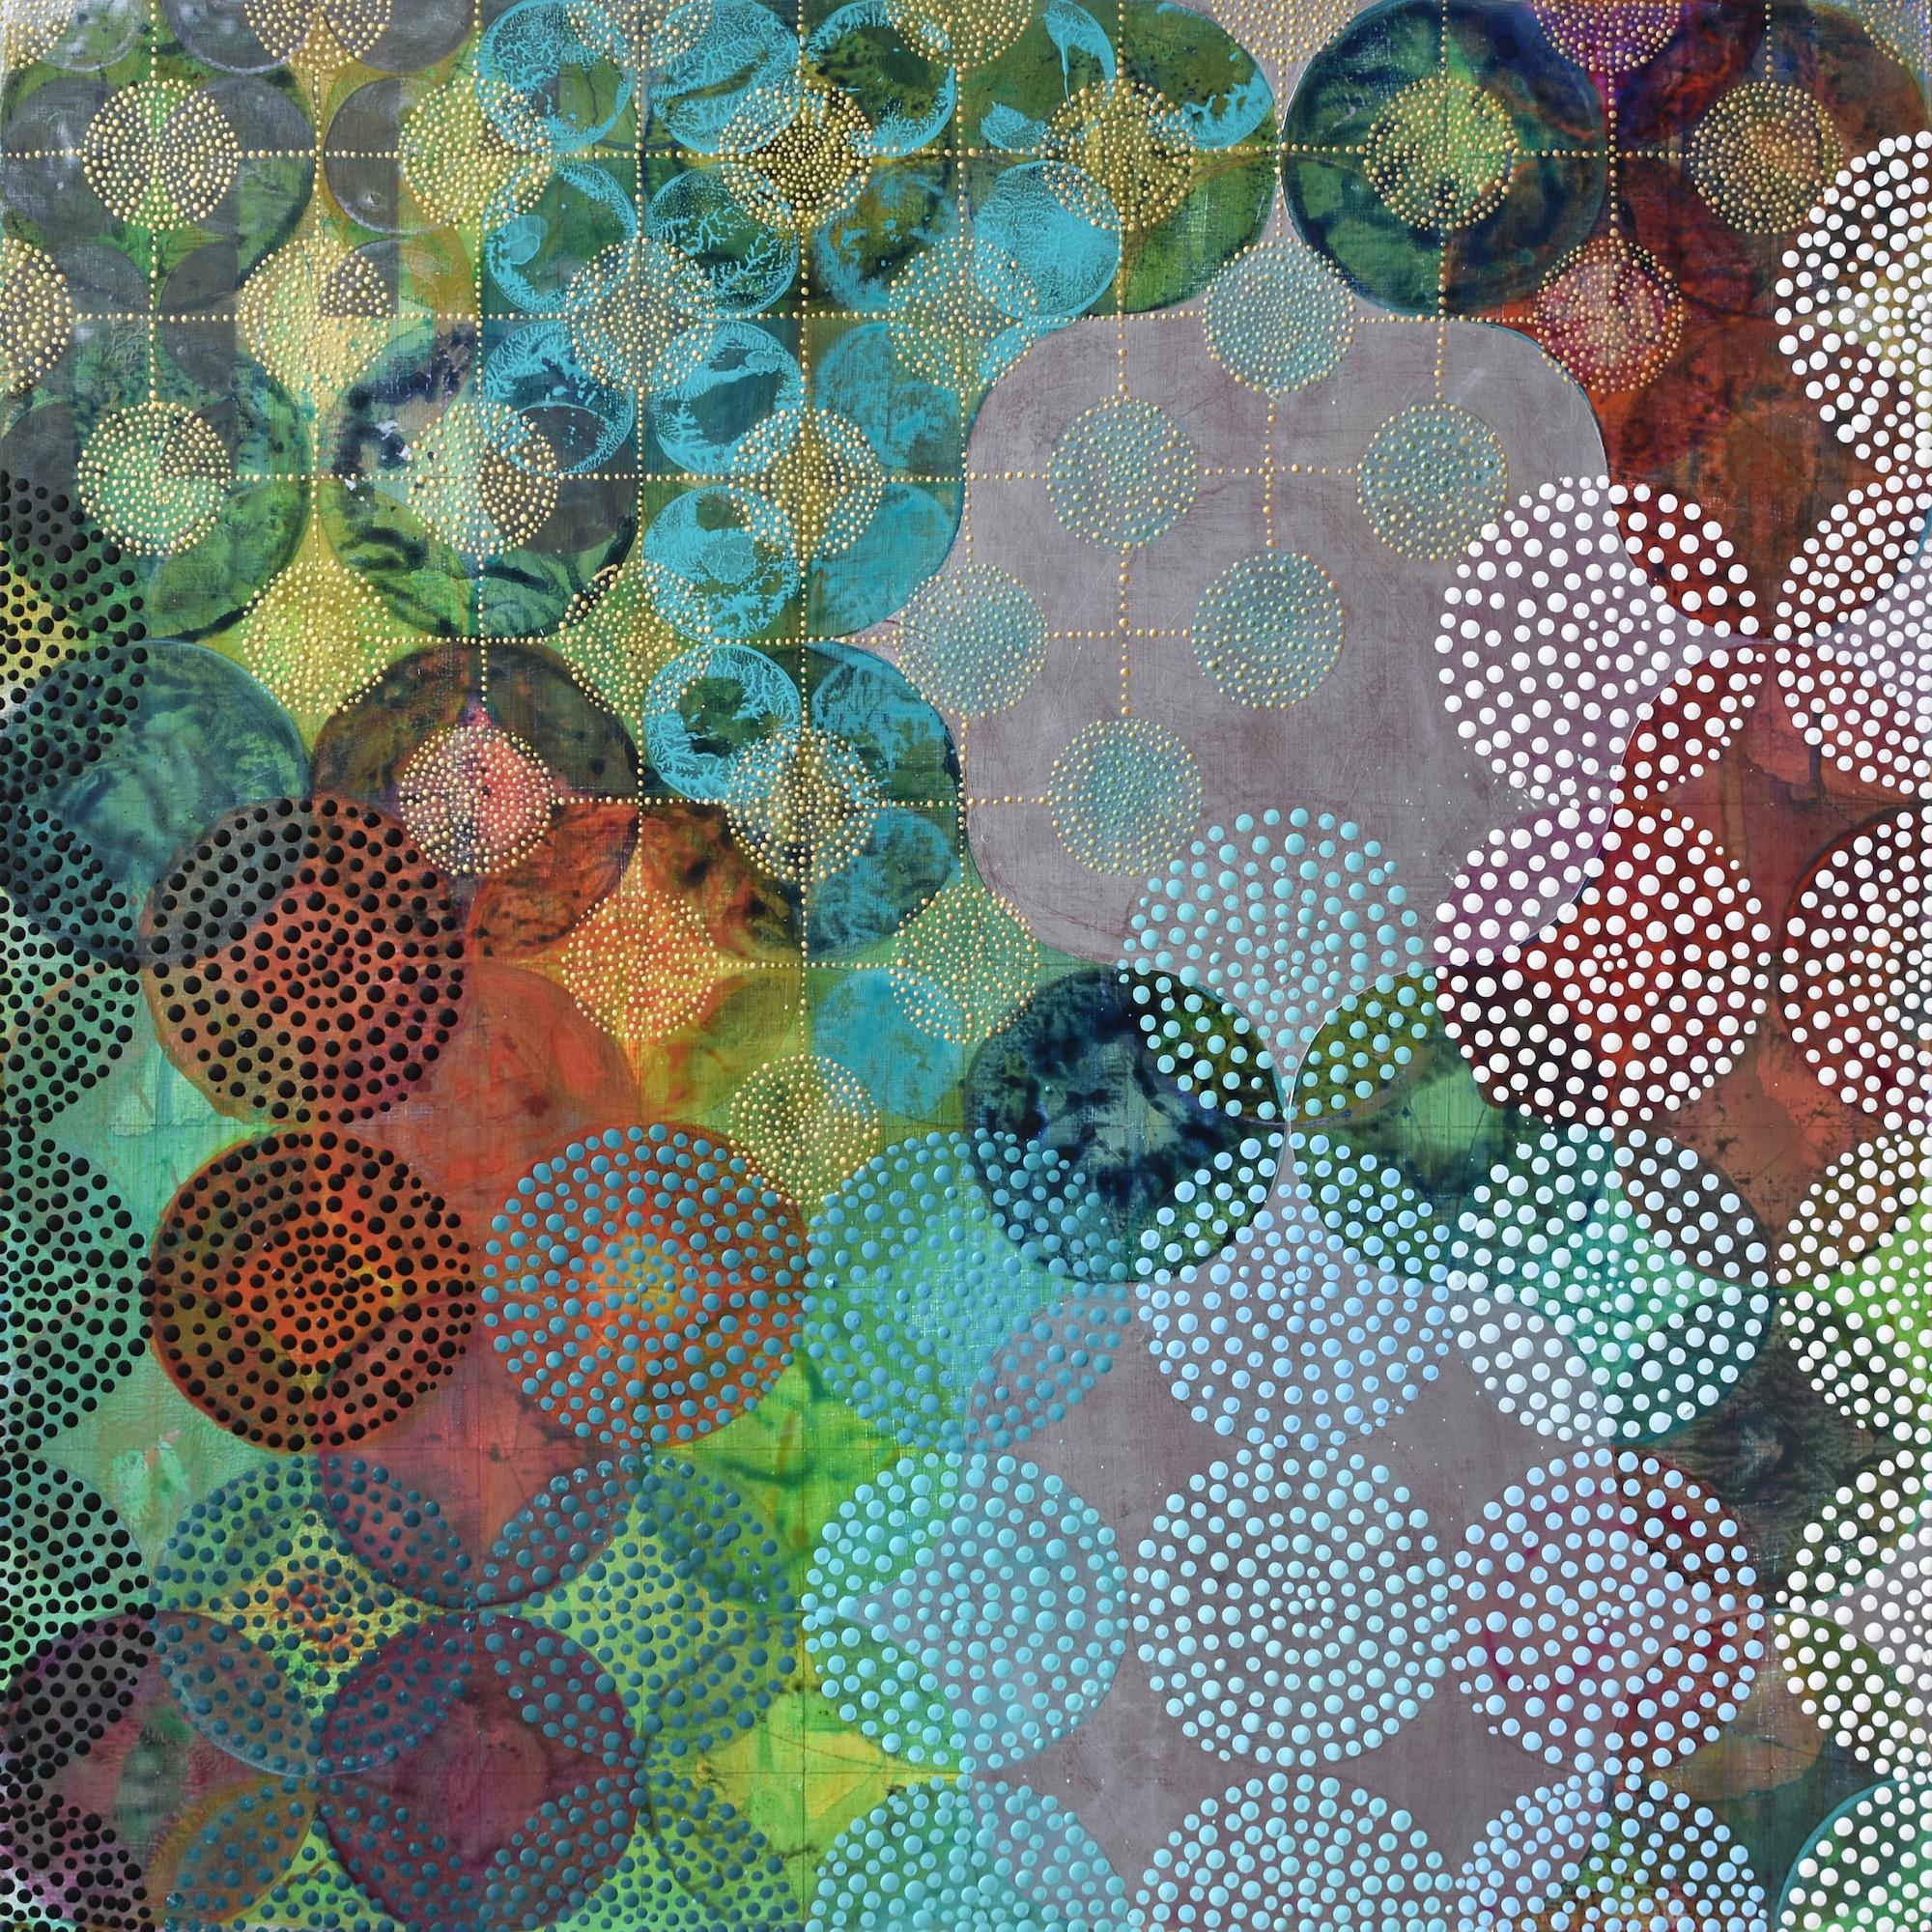 "Circles 35", abstract, geometric, turquoise, green, orange, acrylic painting